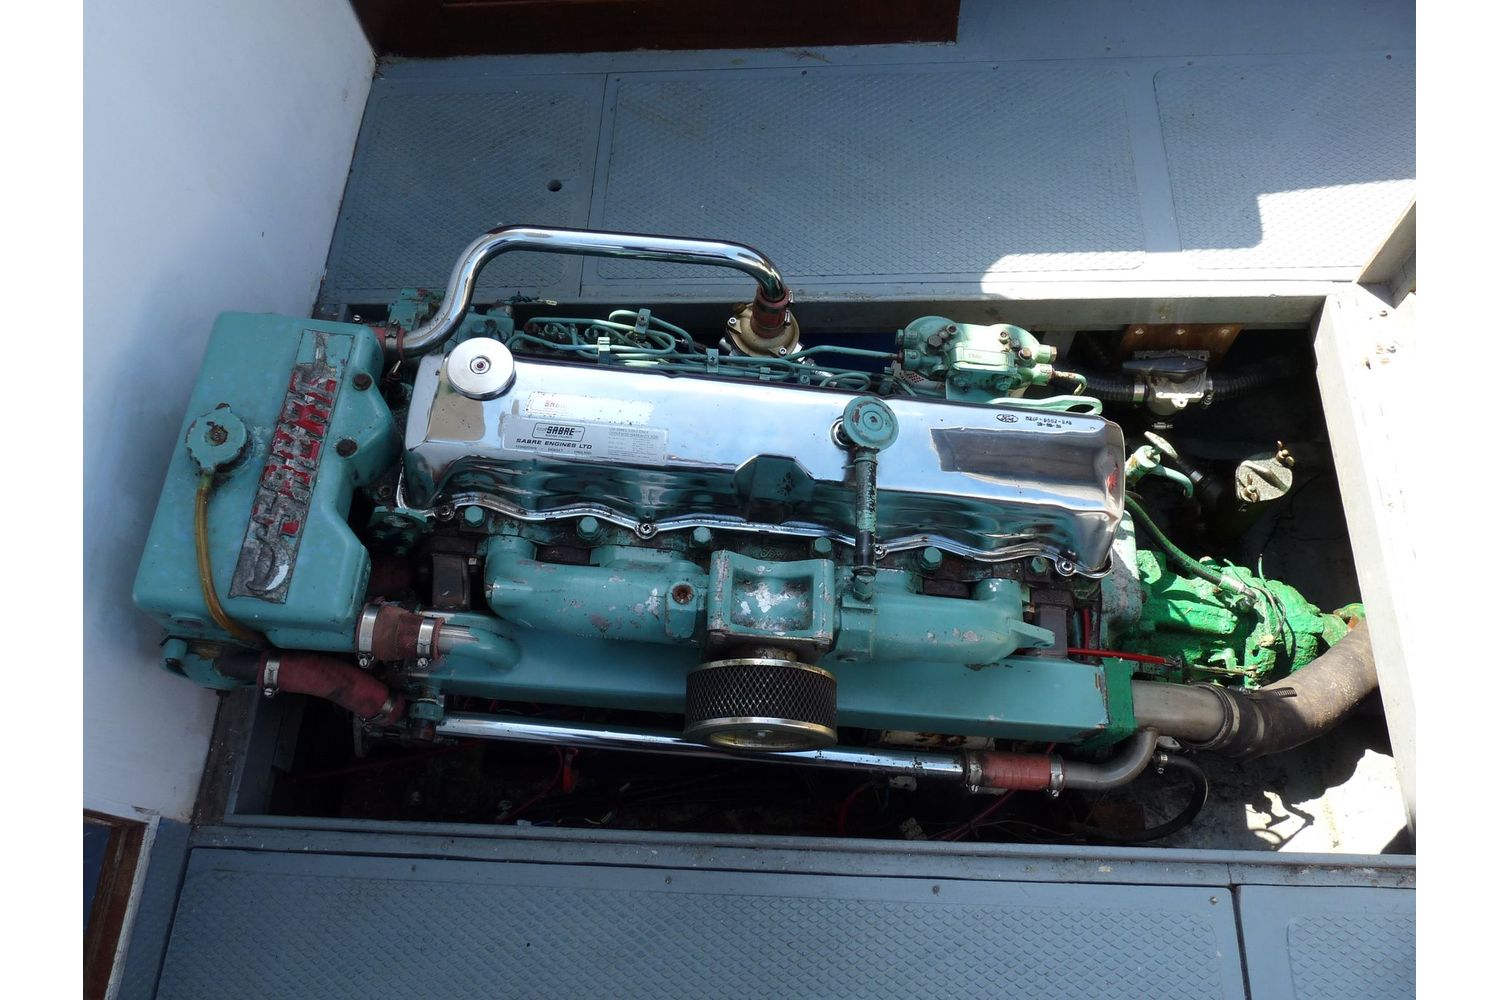 Newhaven Sea Warrior - Ford Sabre 120hp engine